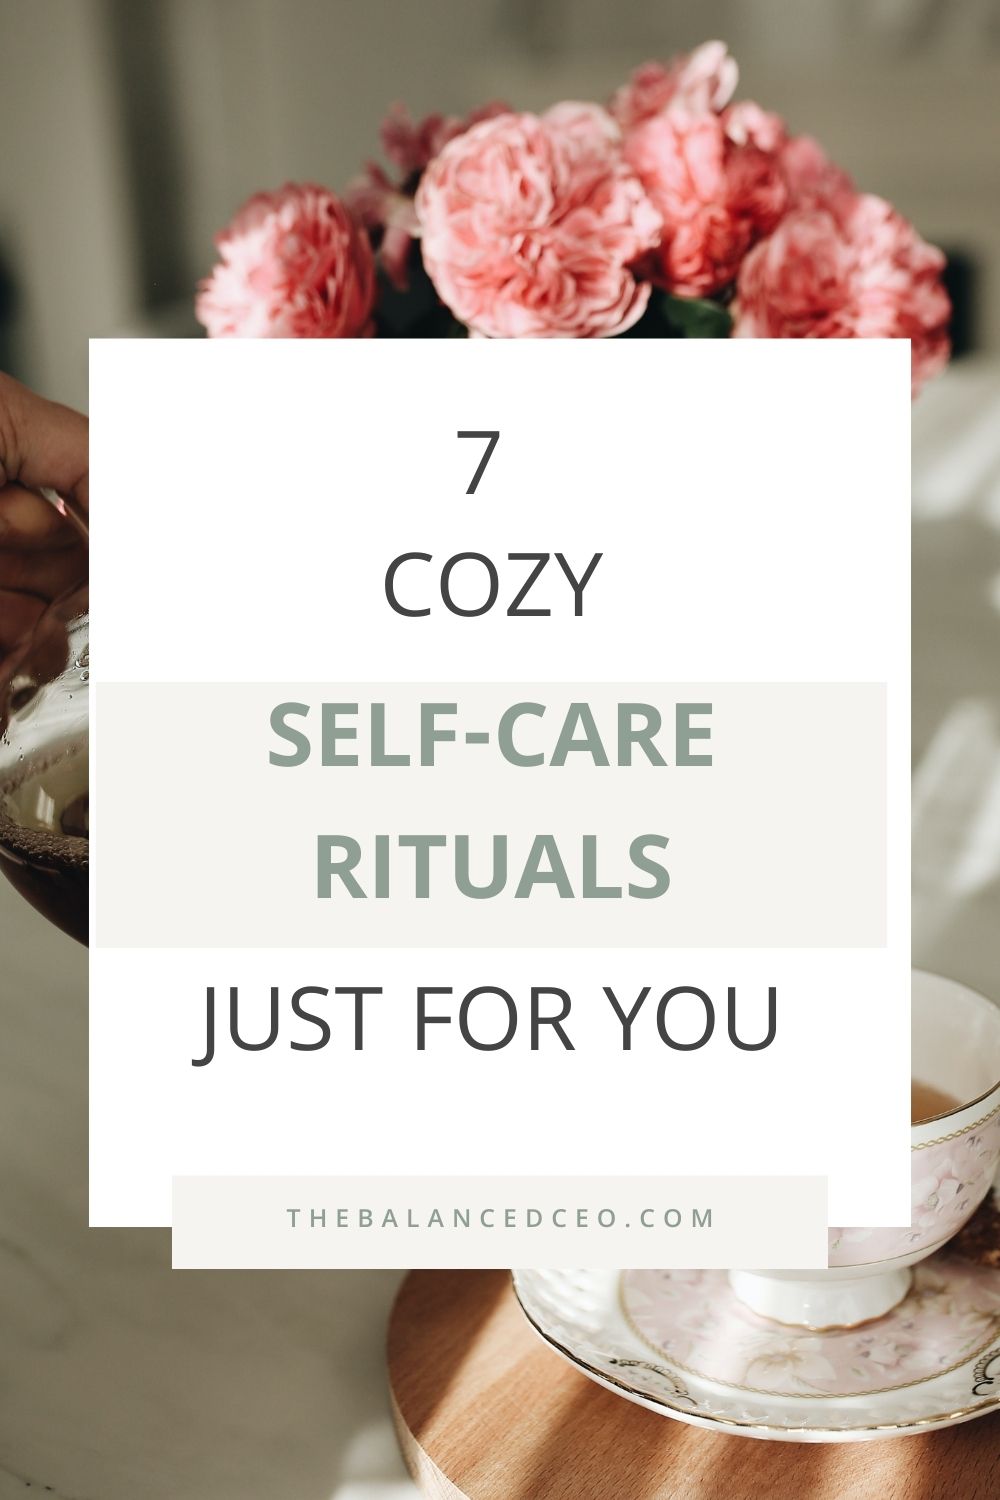 7 Cozy Self-Care Rituals Just For You